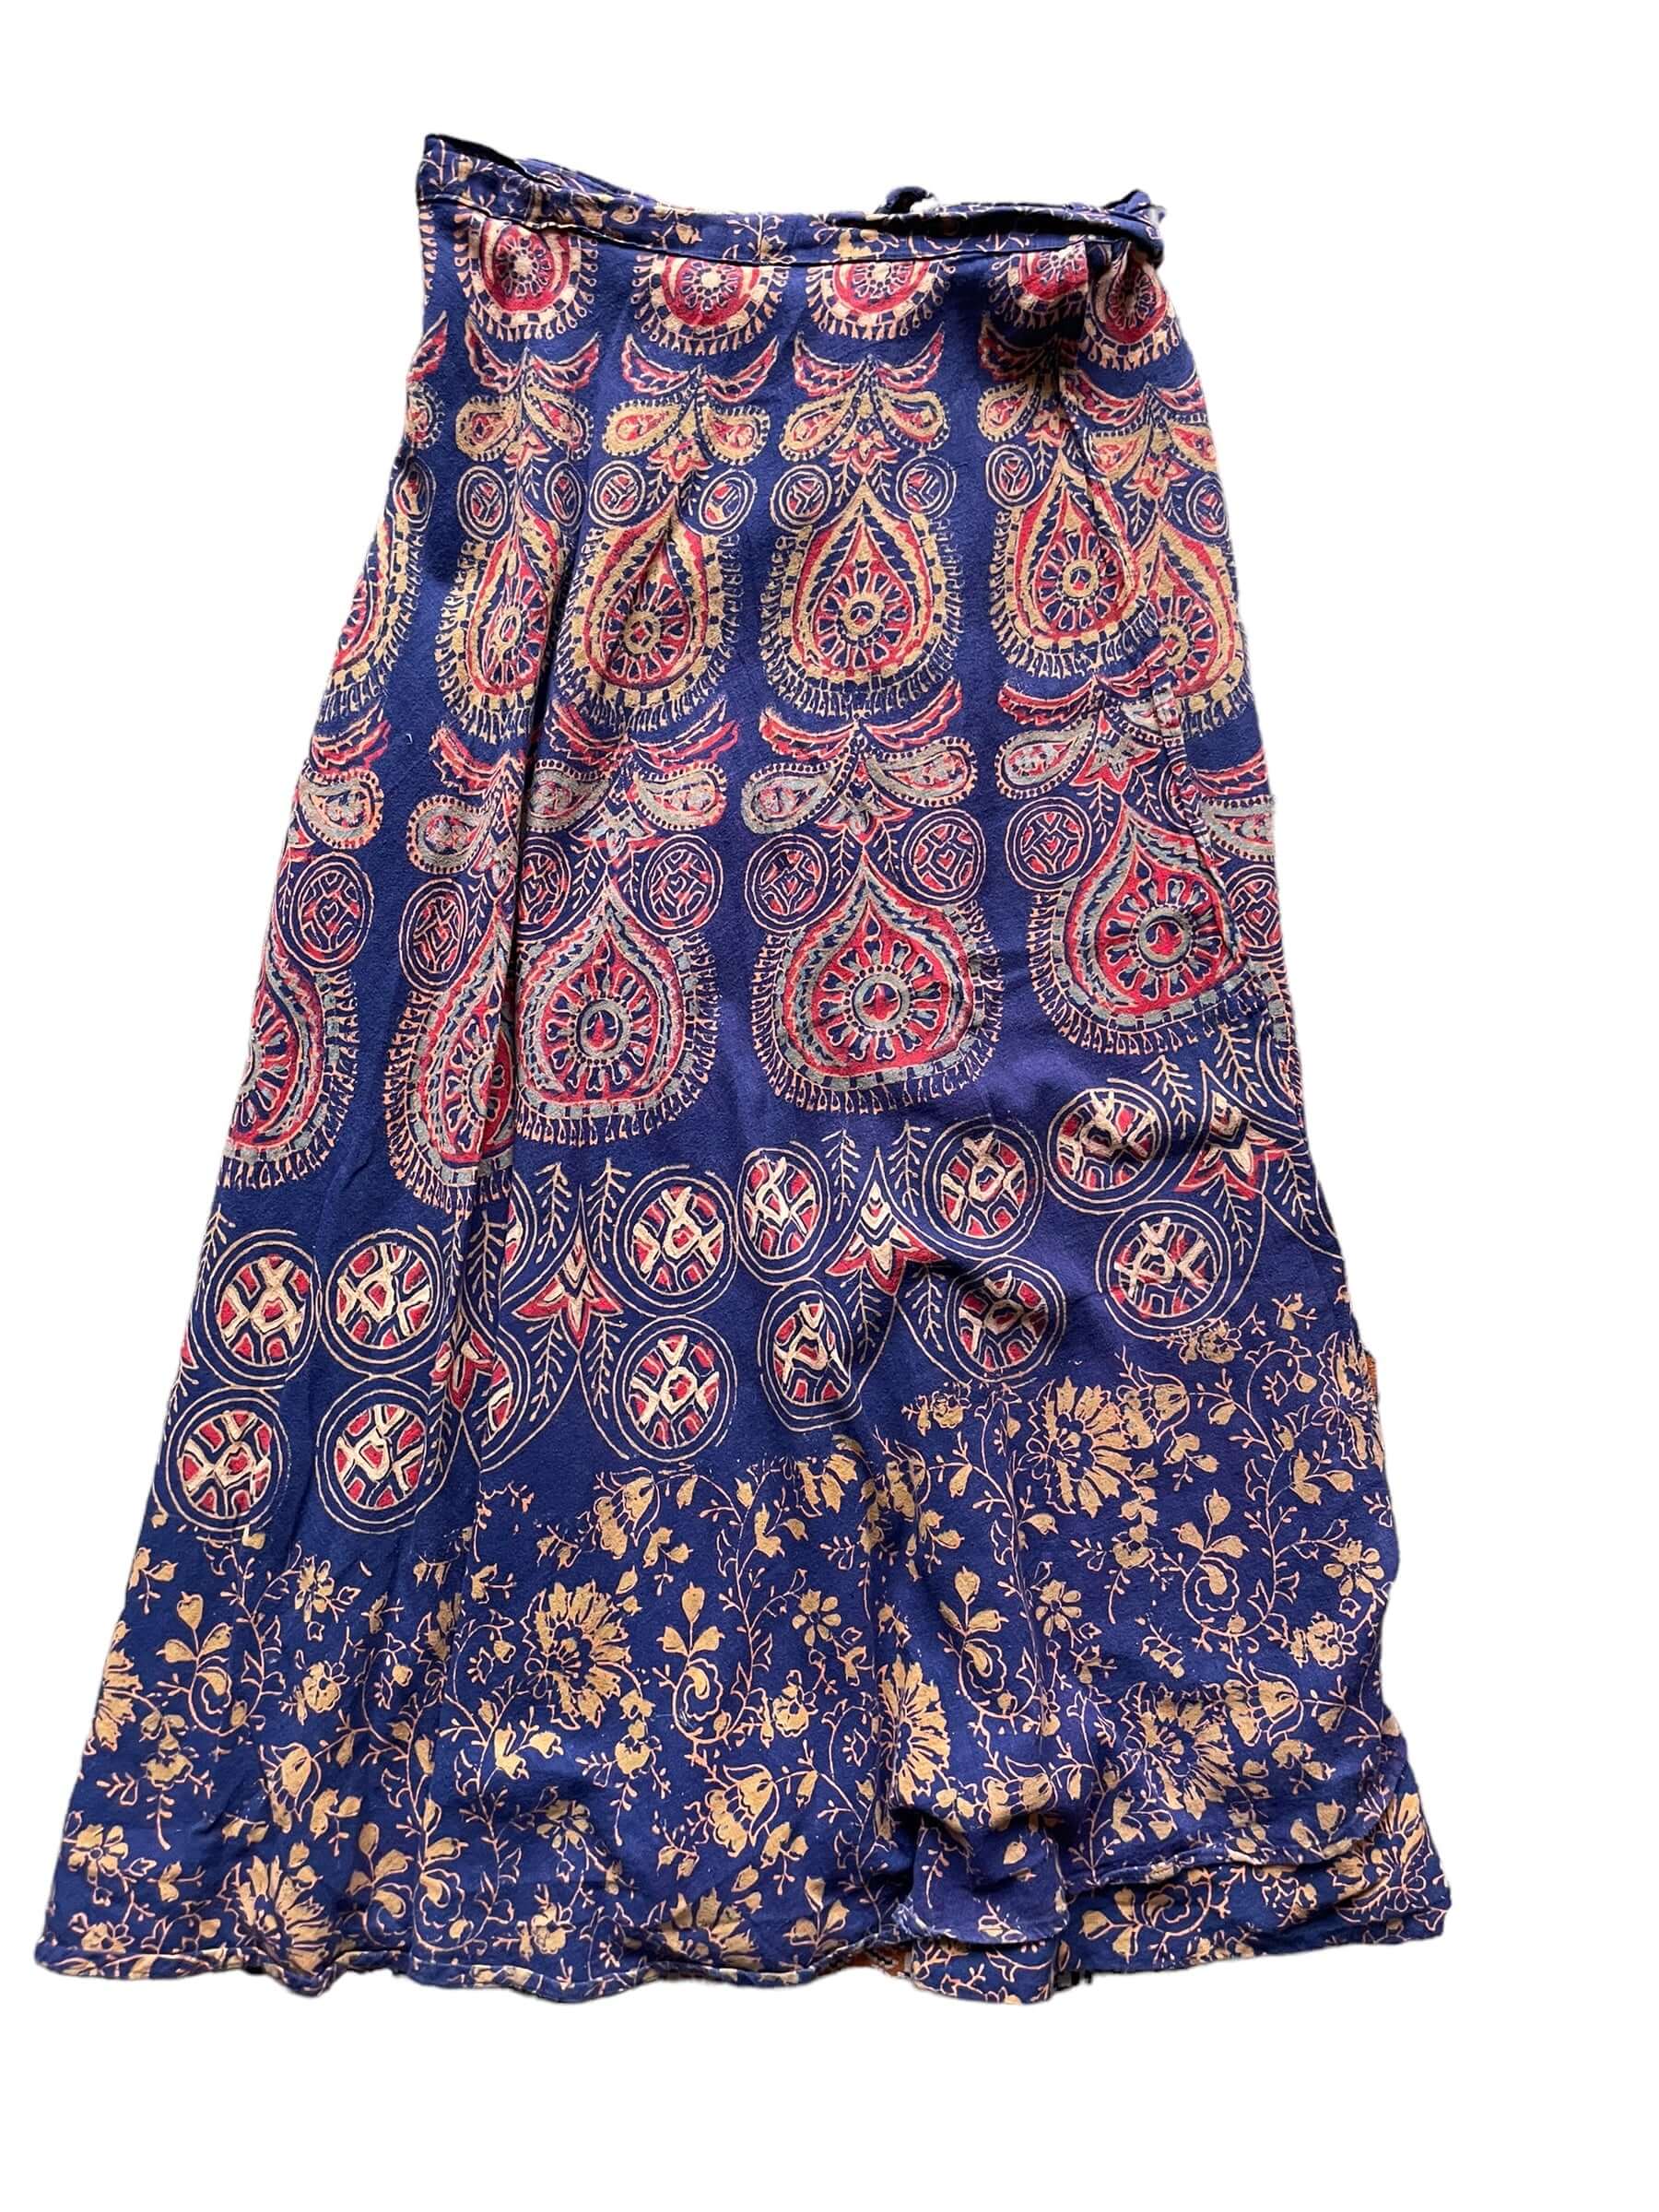 Full back view of Vintage 1970s Indian Cotton Navy Floral Wrap Skirt SZ M-XL | Barn Owl Ladies Clothing | Seattle True Vintage